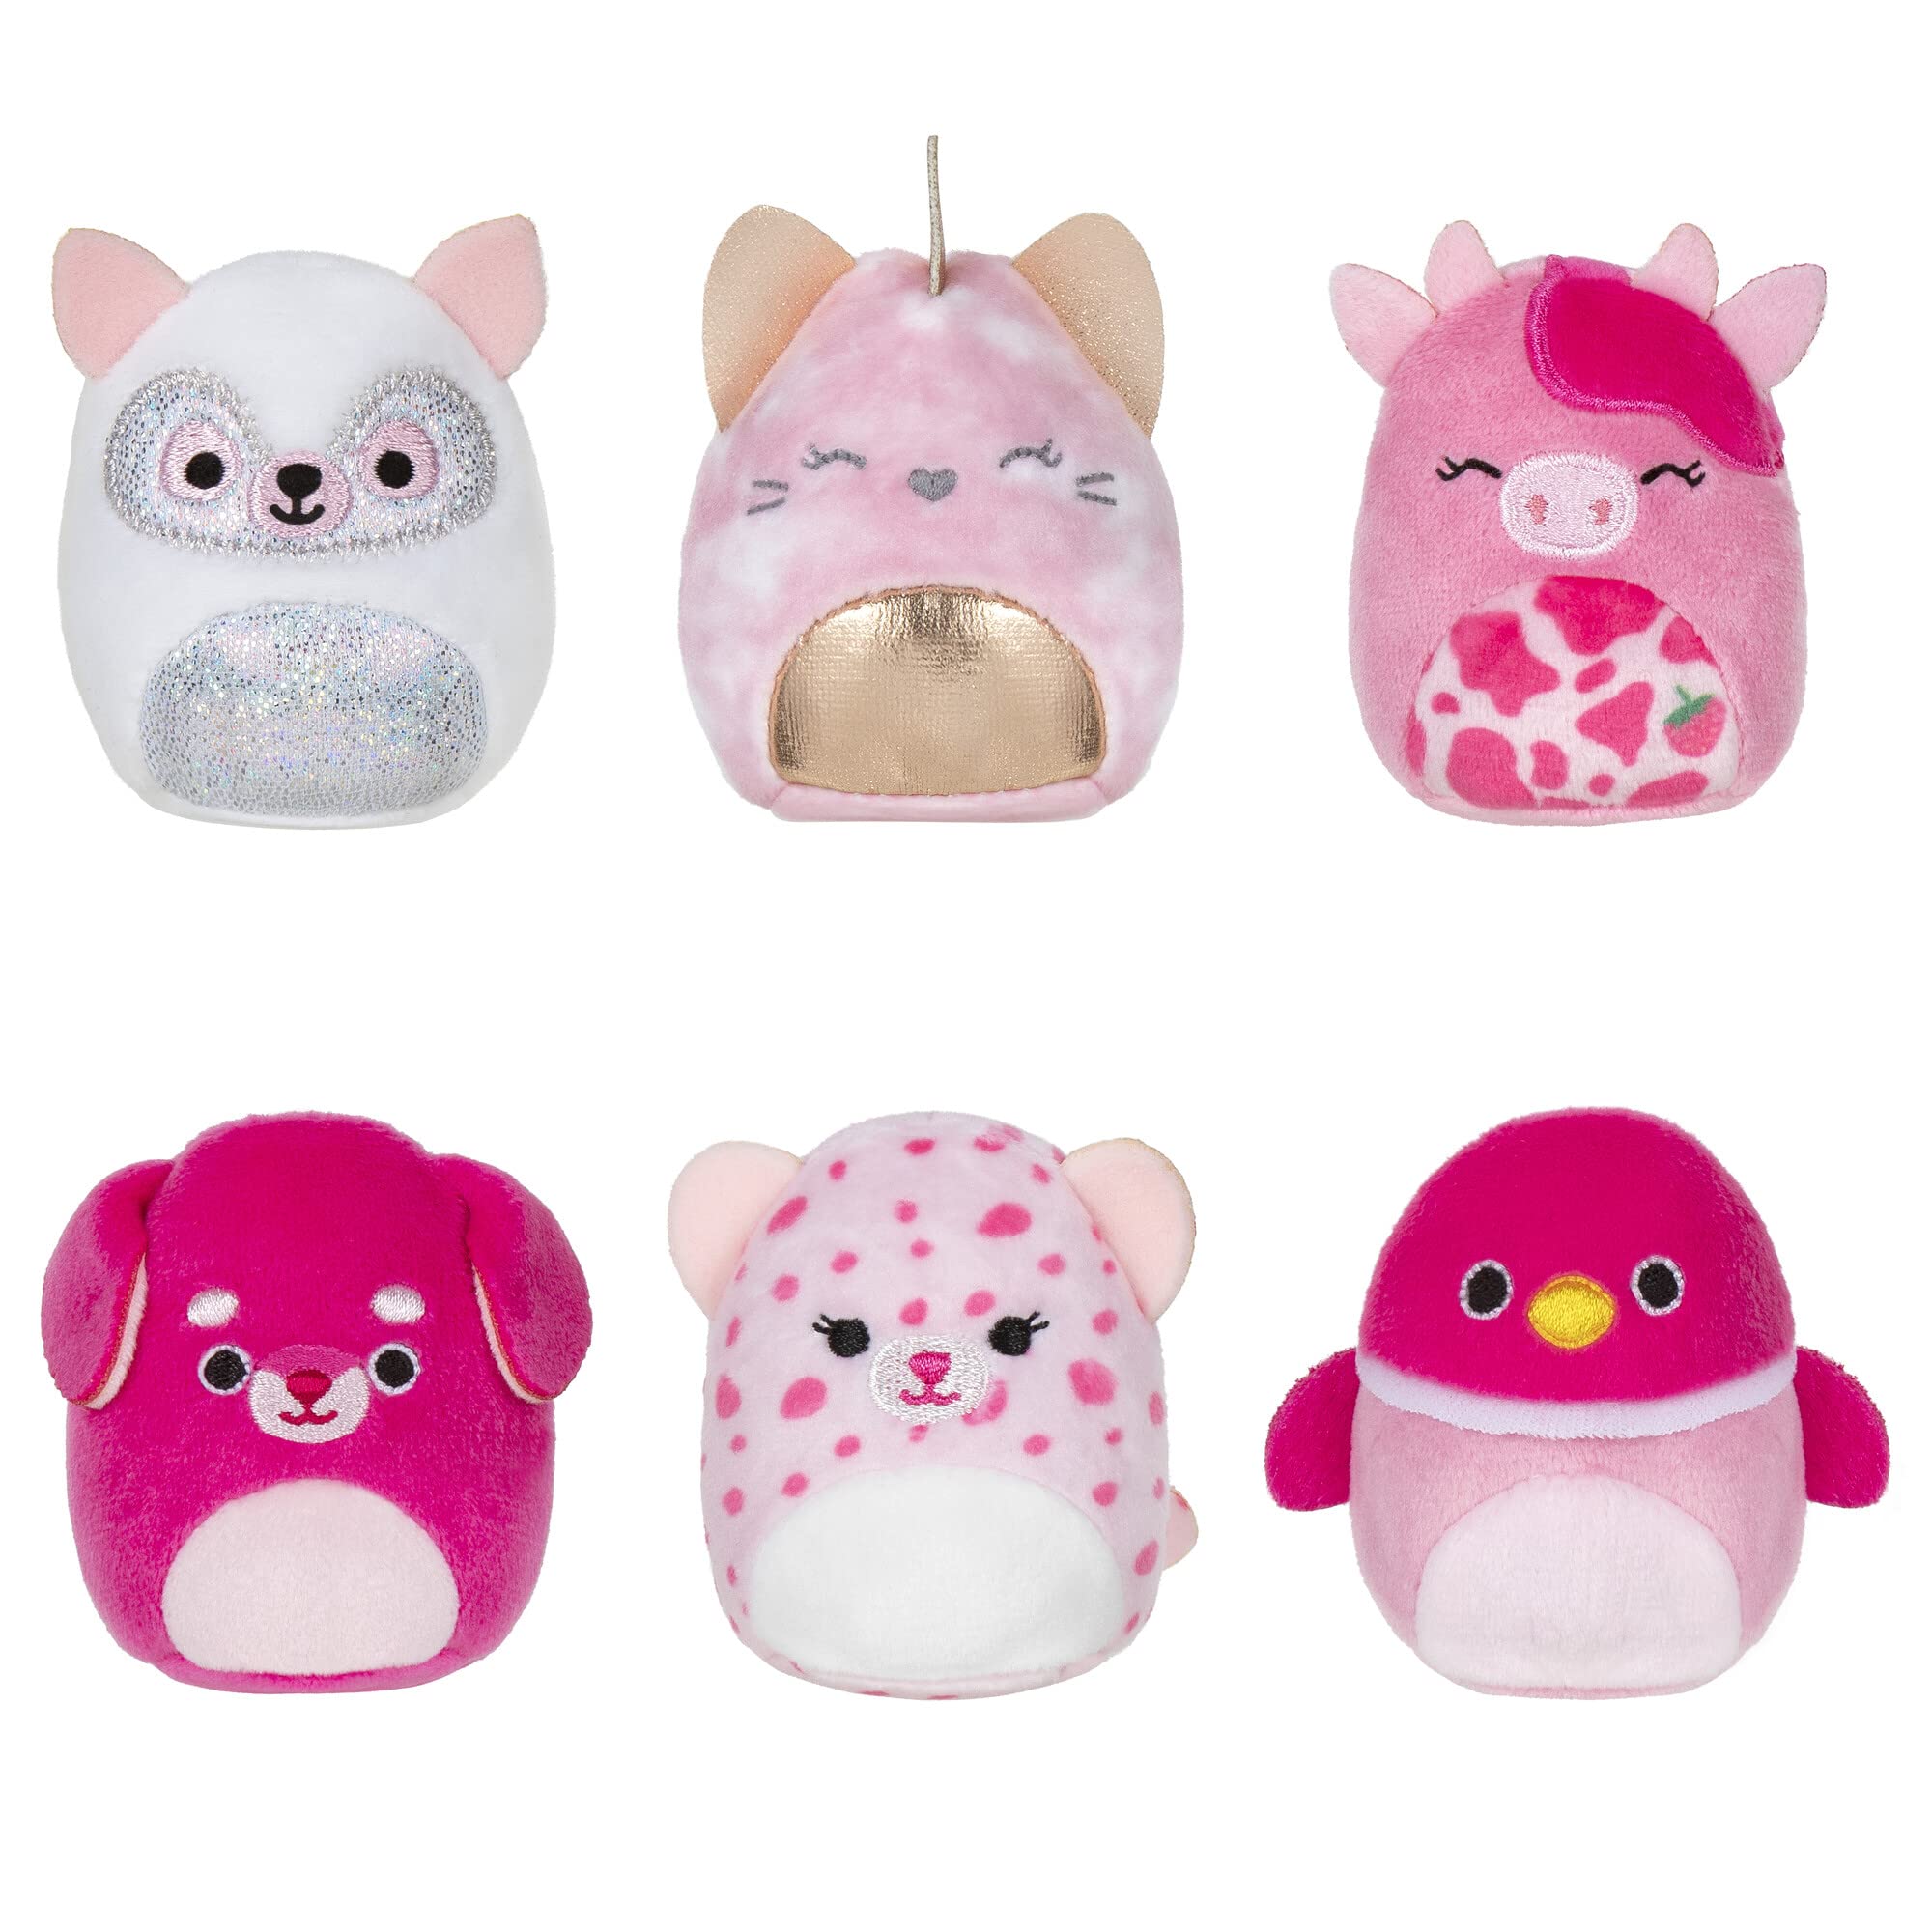 Squishville by Original Squishmallows Perfectly Pink Squad Plush - Six 2-Inch Squishmallows Plush Including Catrine, Della, Lorie, Kaitlyn, Calynda, and 1 Surprise - Toys for Kids